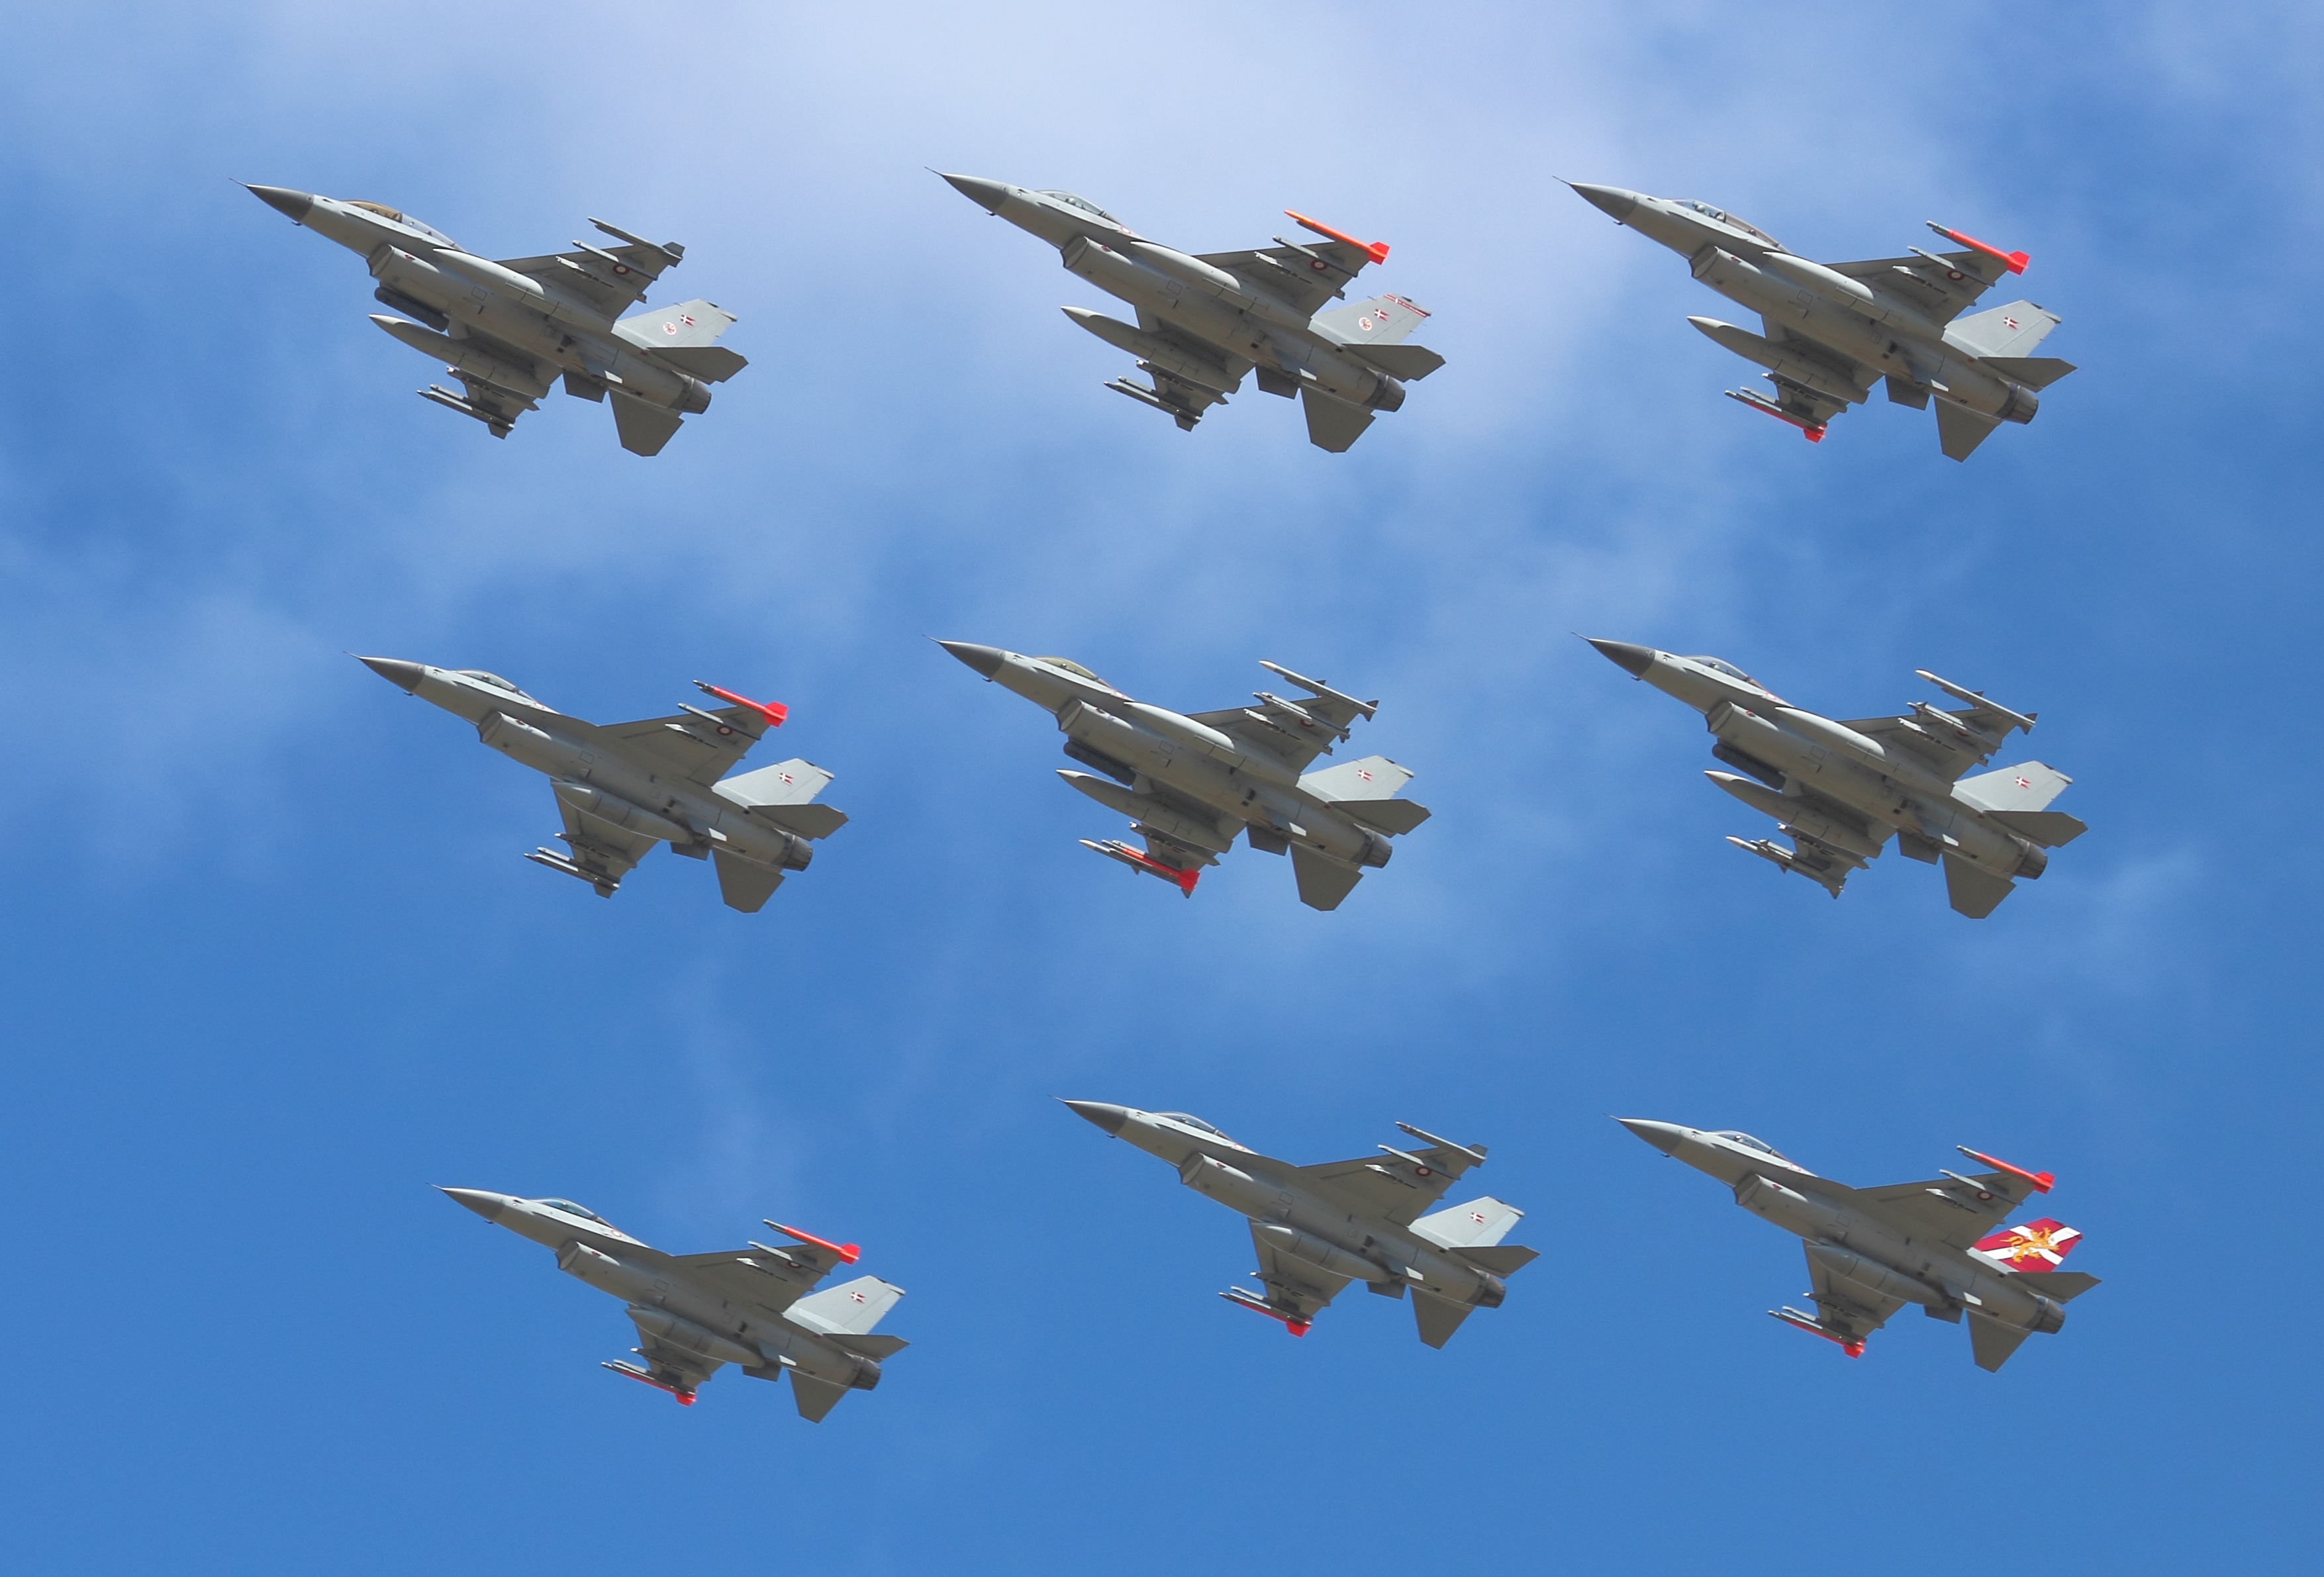 The Danish Armed Forces will sell aging fighter jets in anticipation of a new fleet